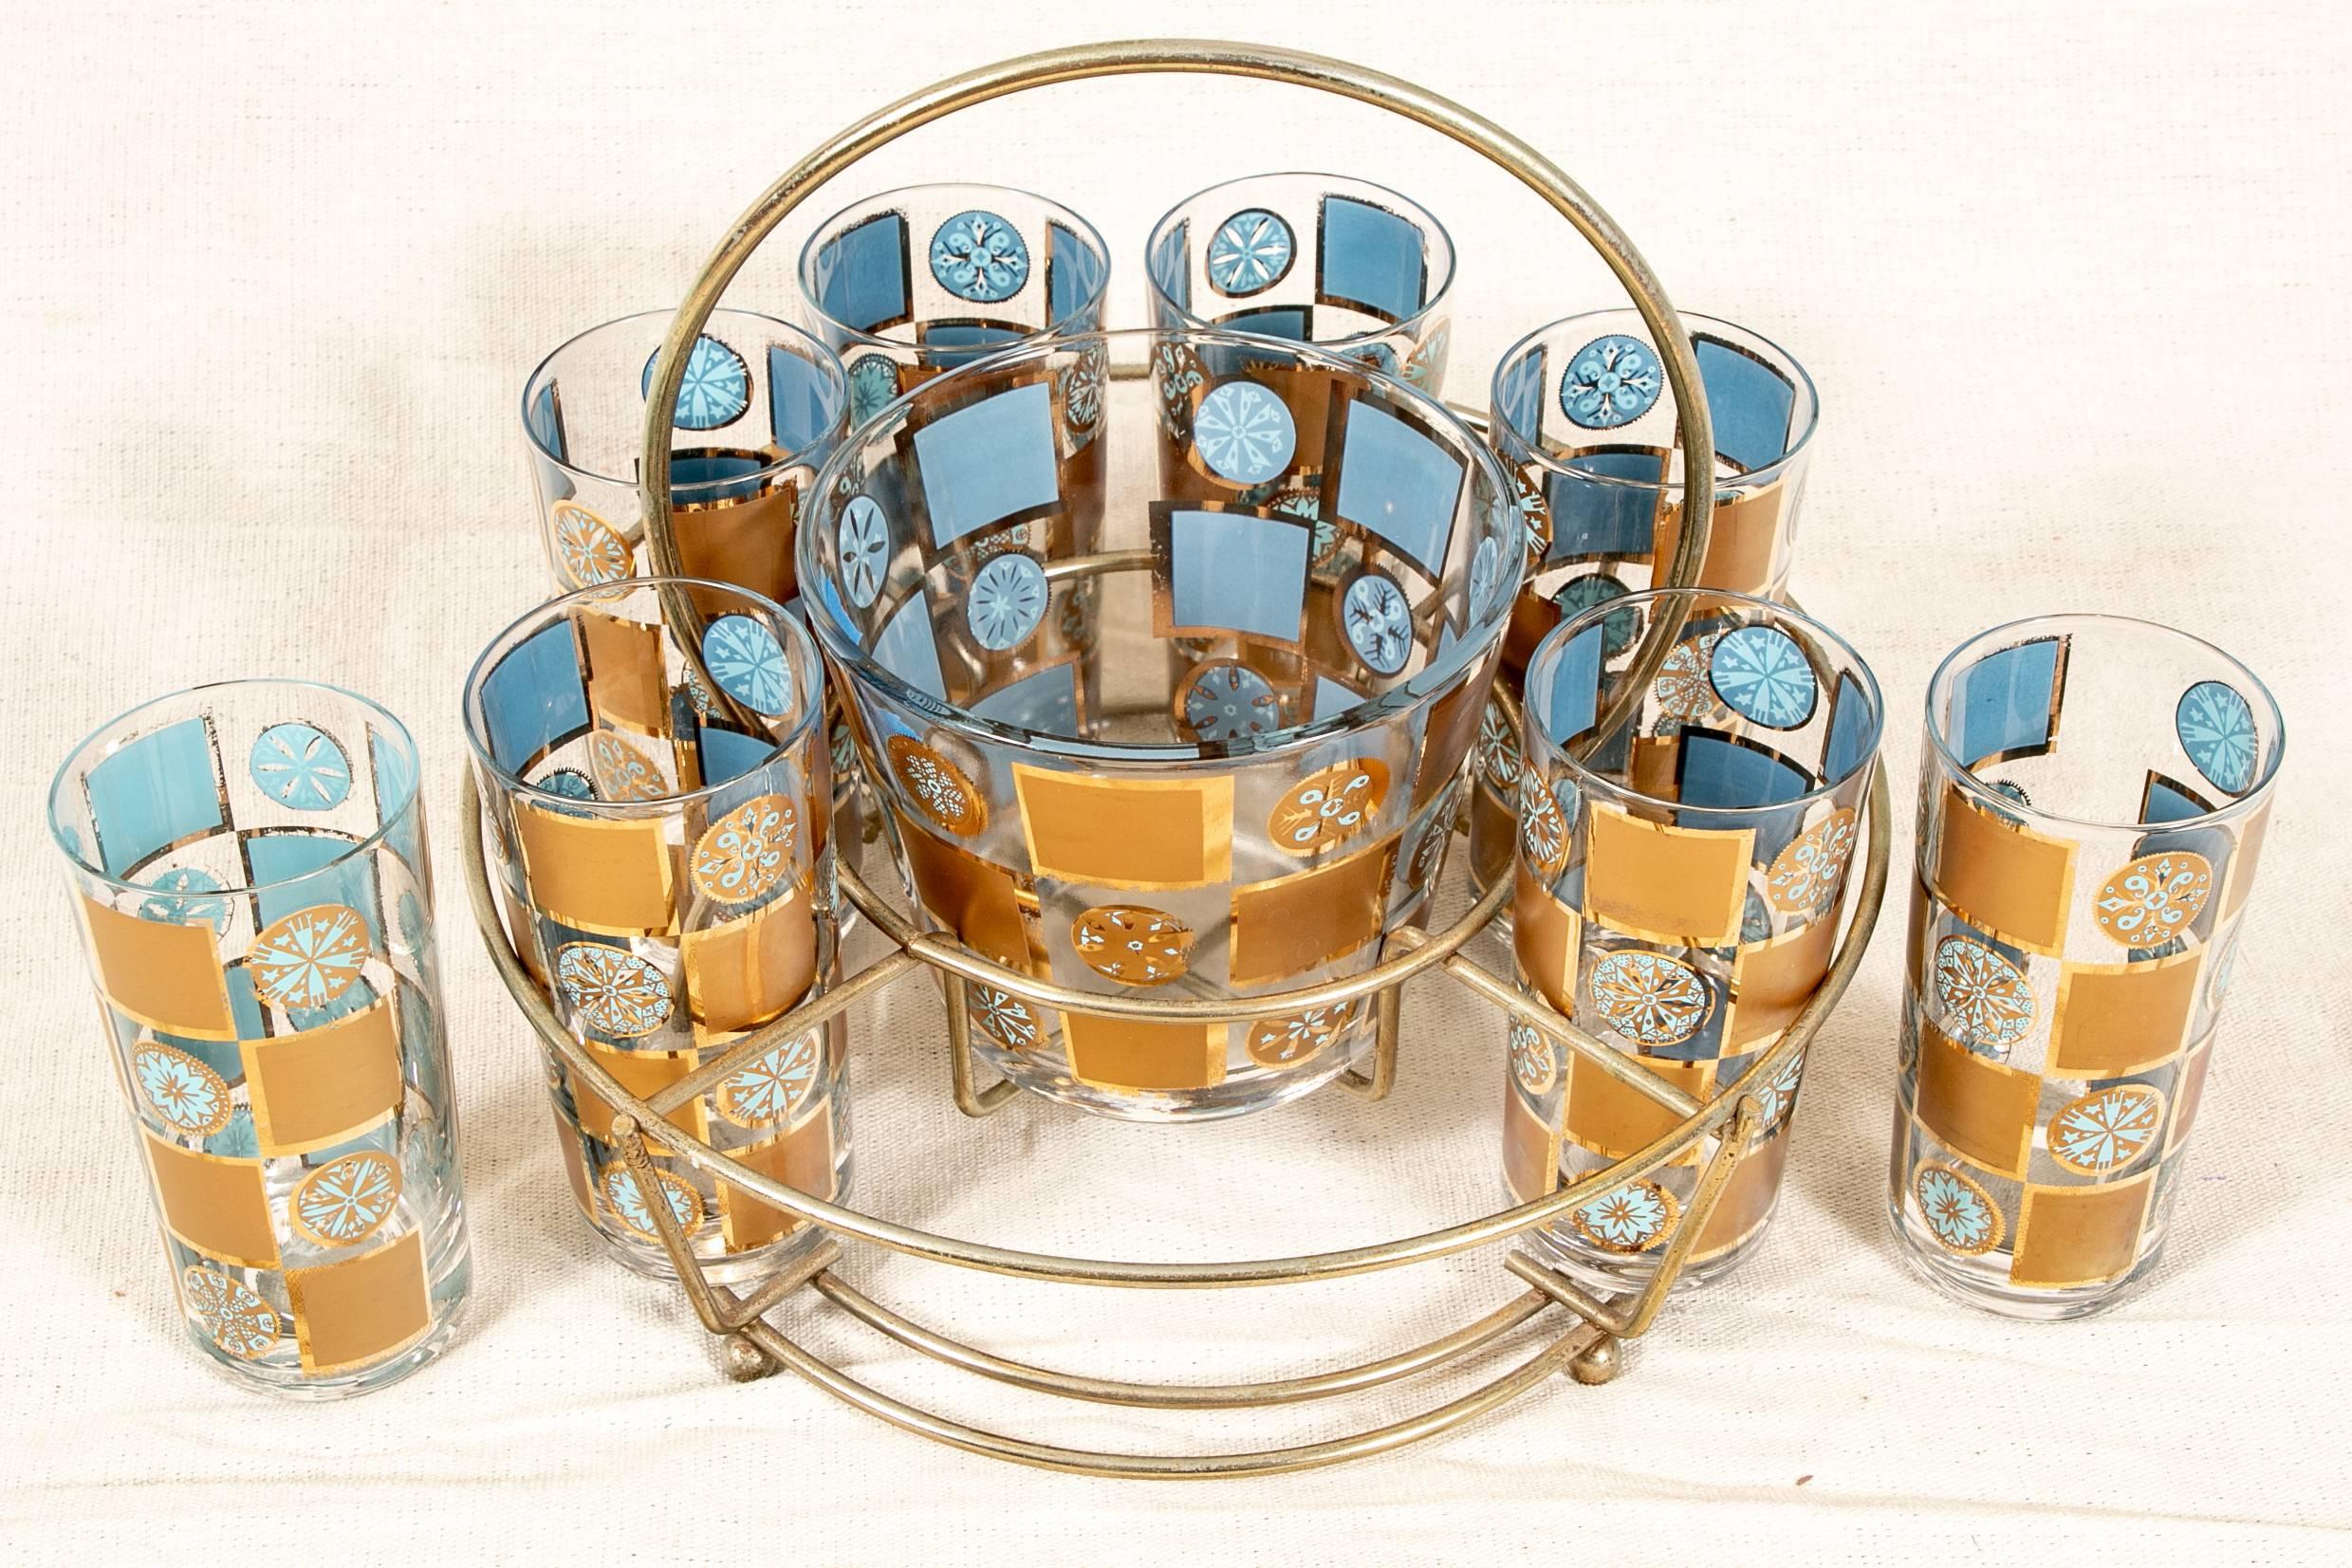 Vintage bar cart with match glassware, two-tiered circular chrome cart with blue and gilt decorated glass tiers with rosettes and squares, along with matching tall glasses with a glass bowl in the center displayed in a removable chrome stand with a